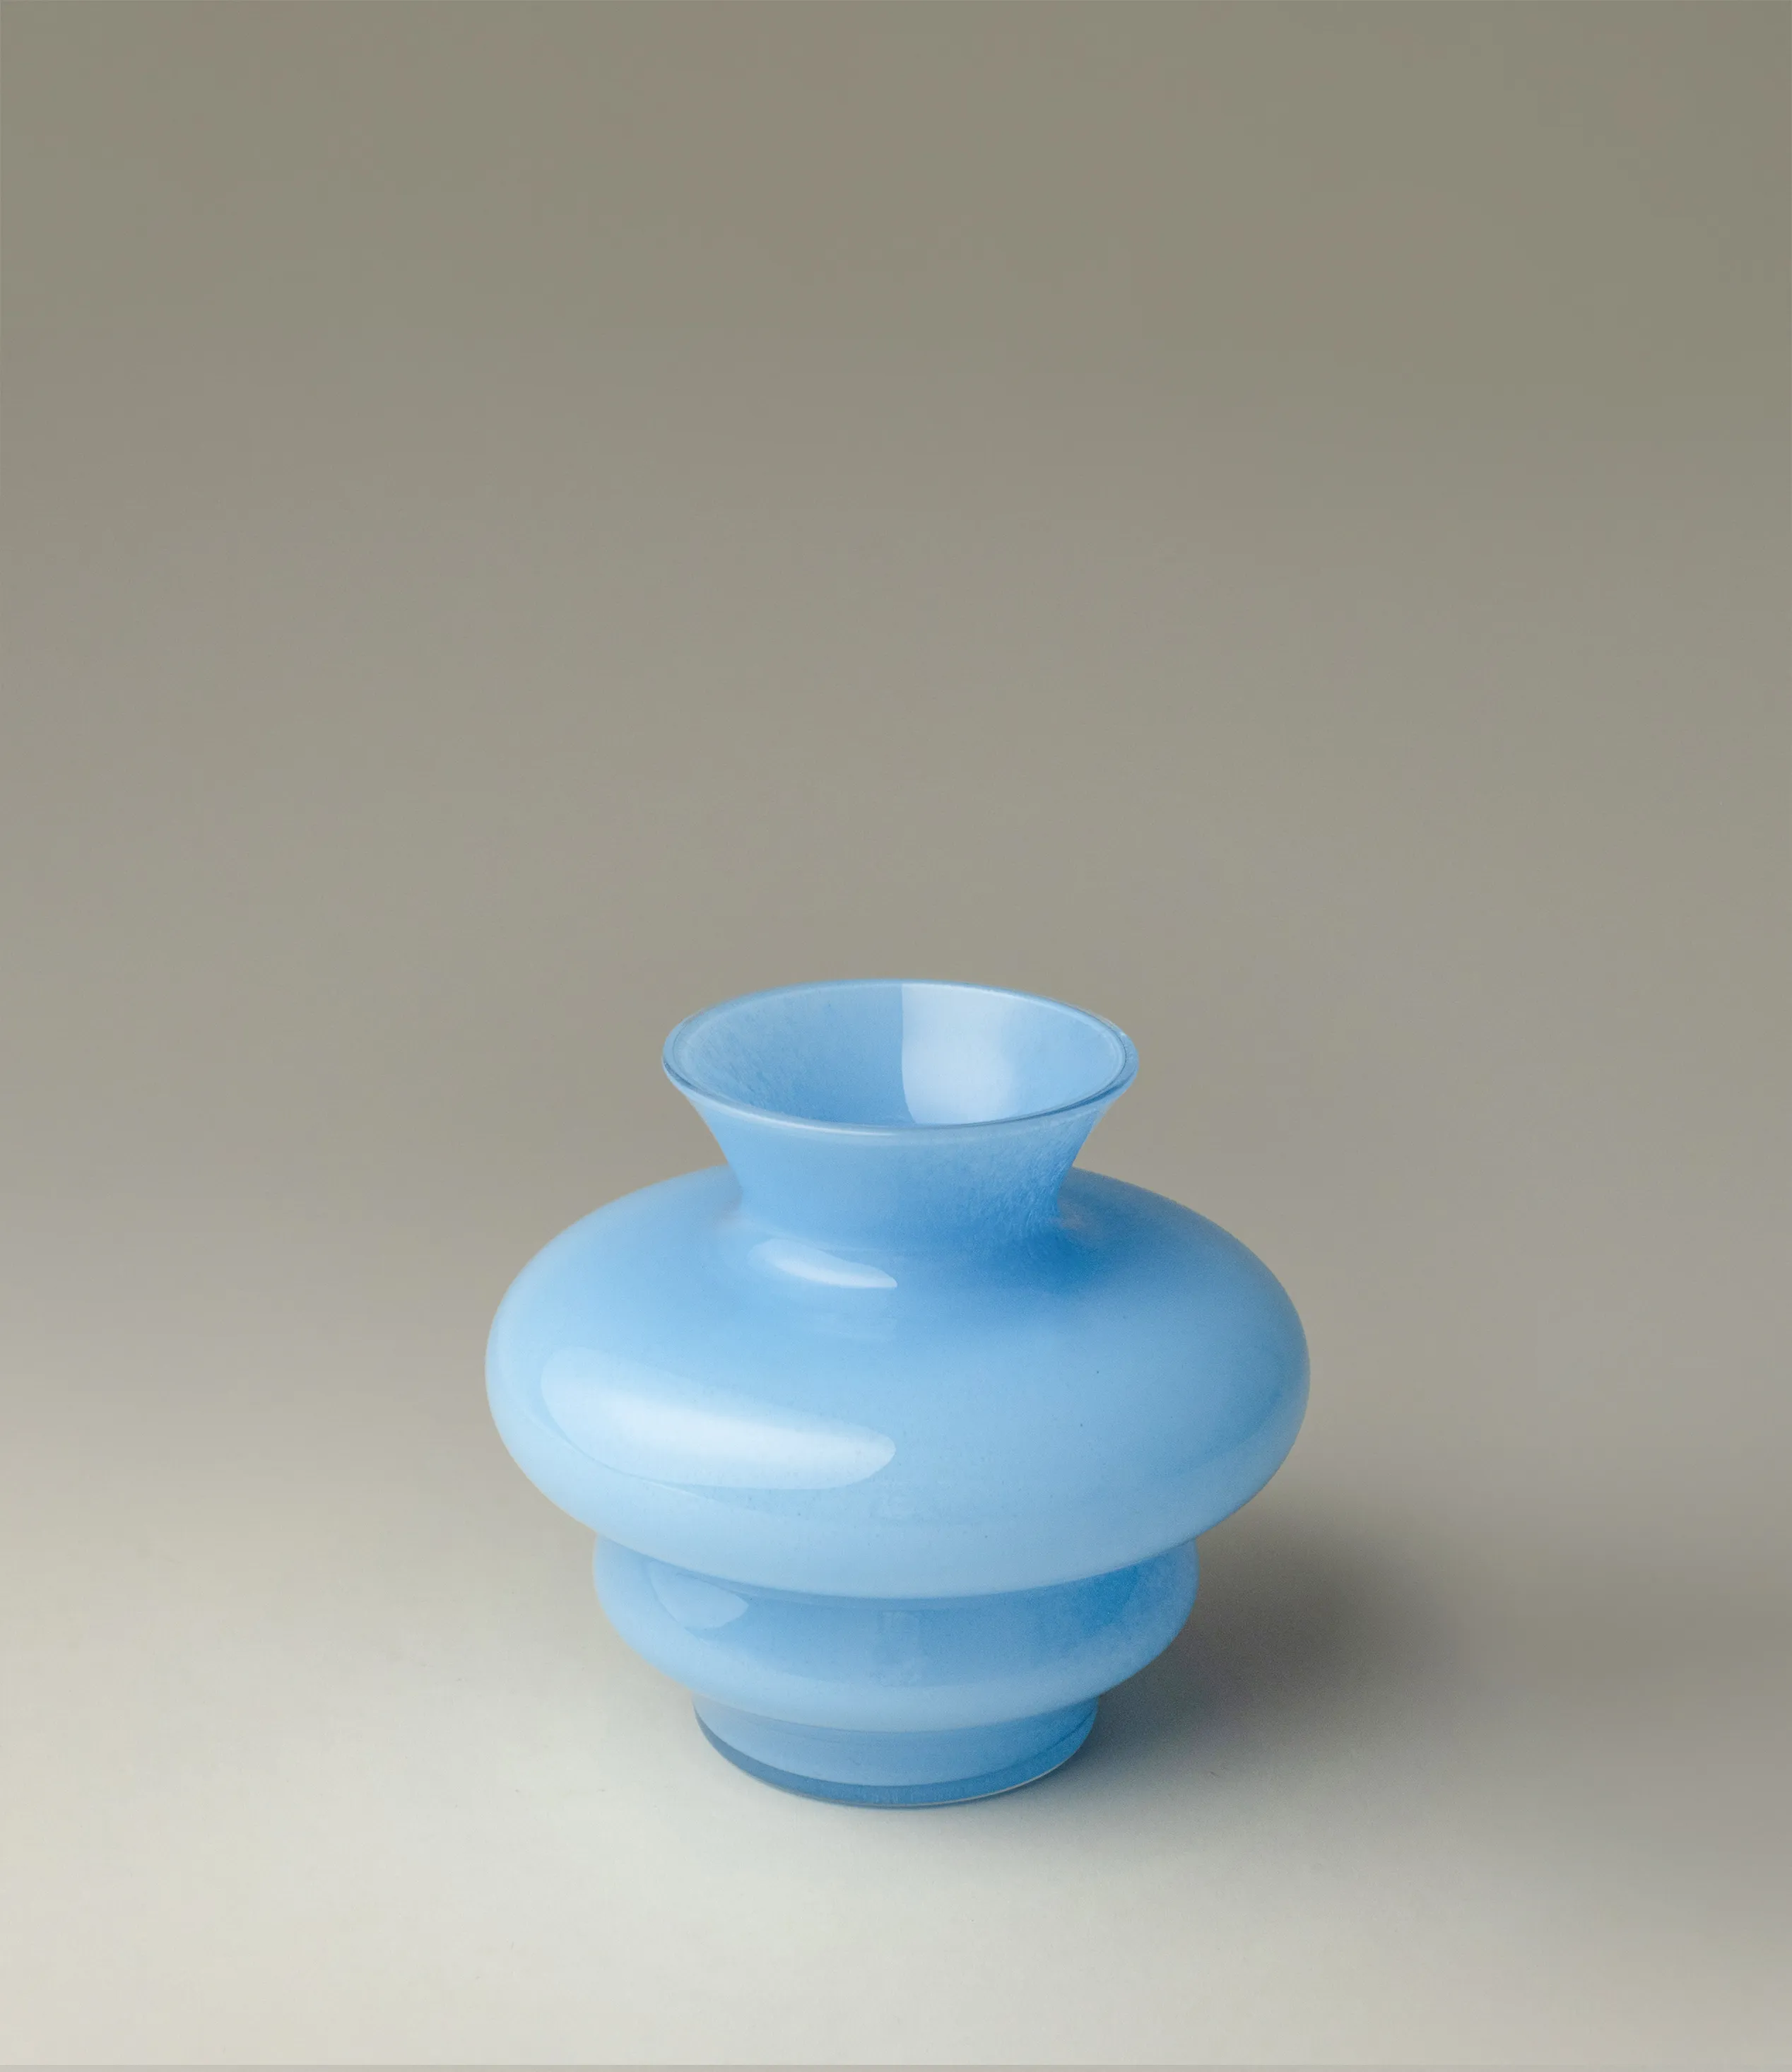 Wave Vase Mini from Stences comes in a Blue color. It is a cury glass vase, which makes your interior pop.